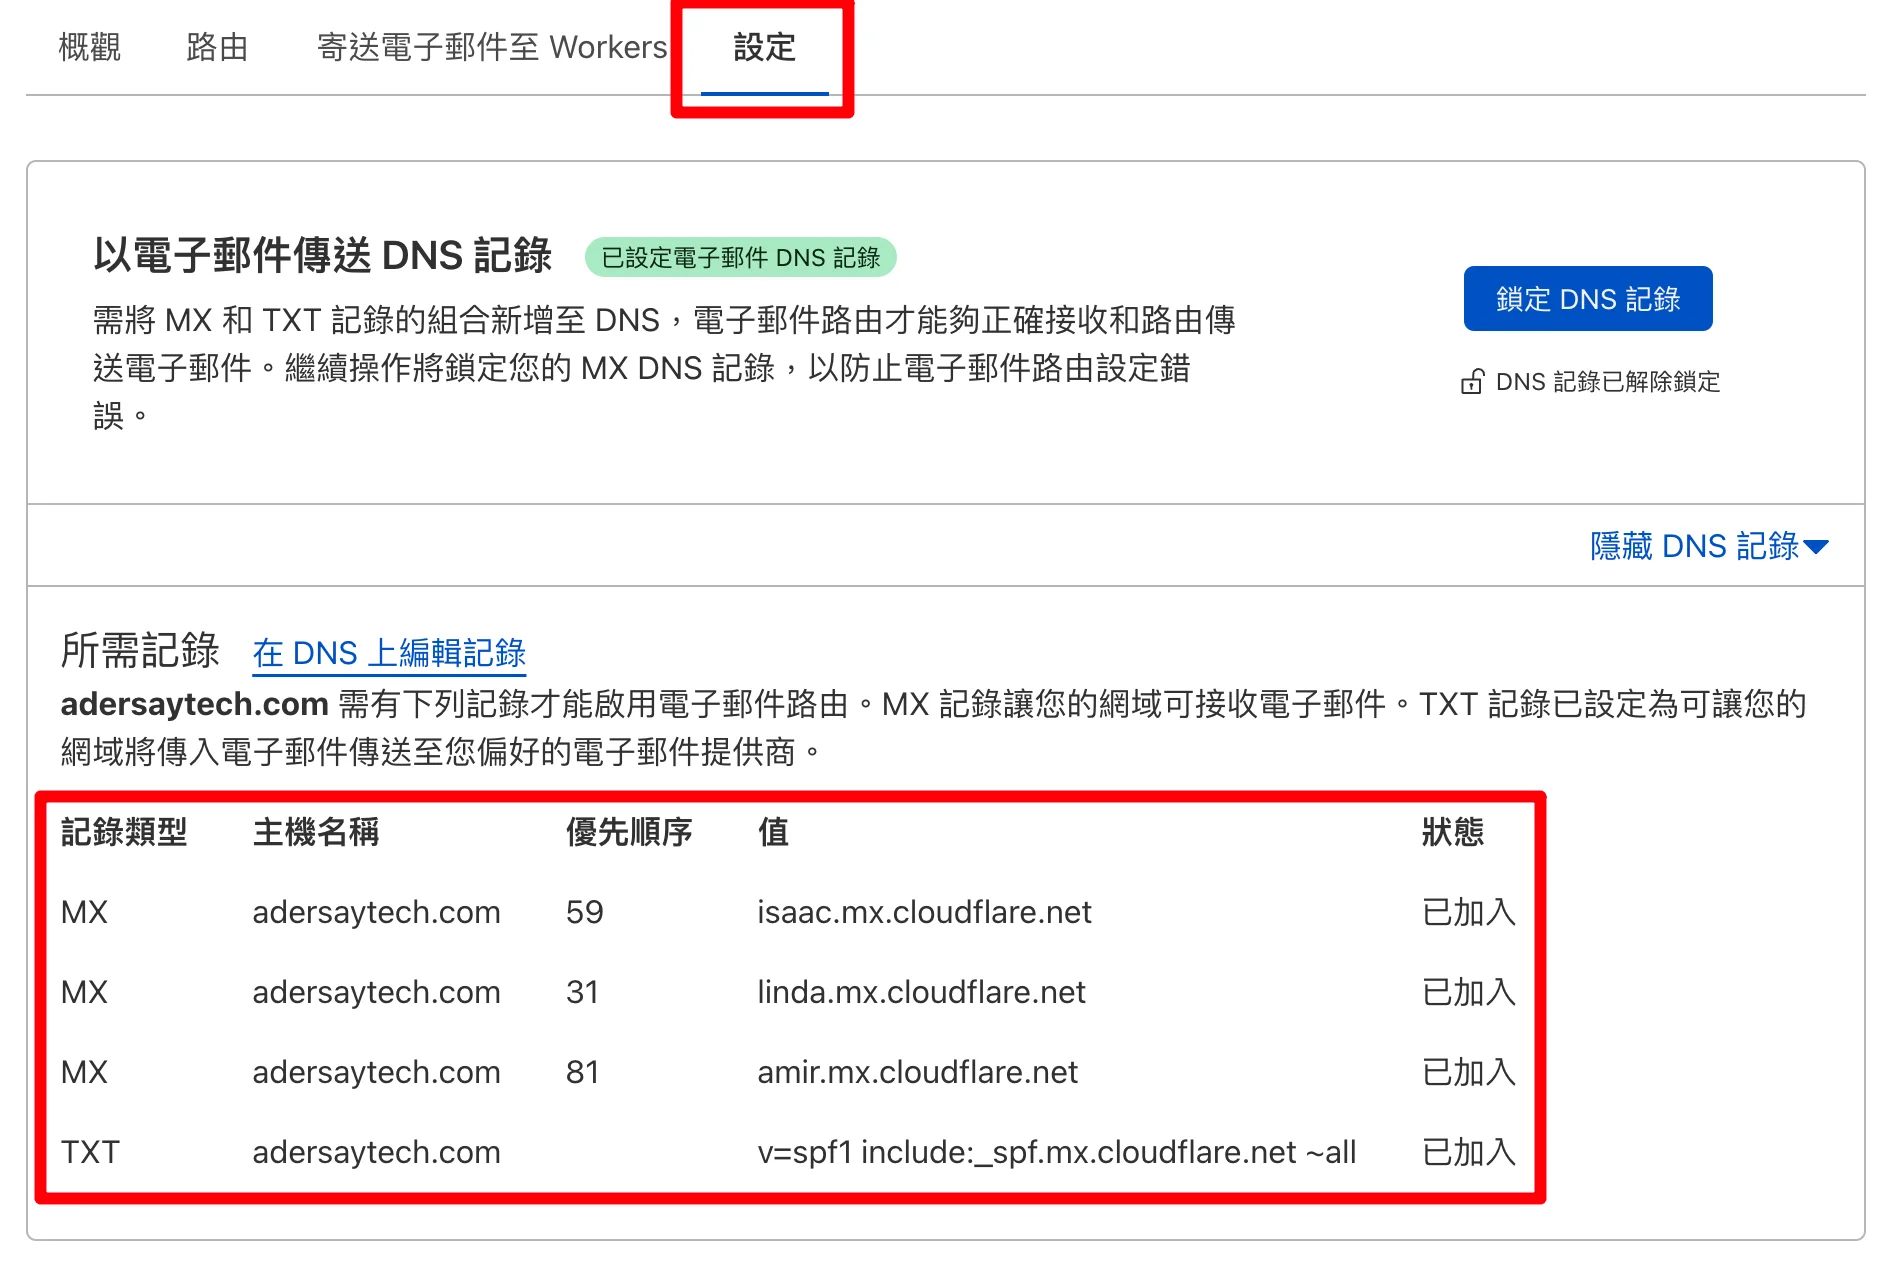 Cloudflare Email Routing 電子郵件路由，可免費自訂網域信箱！ 25